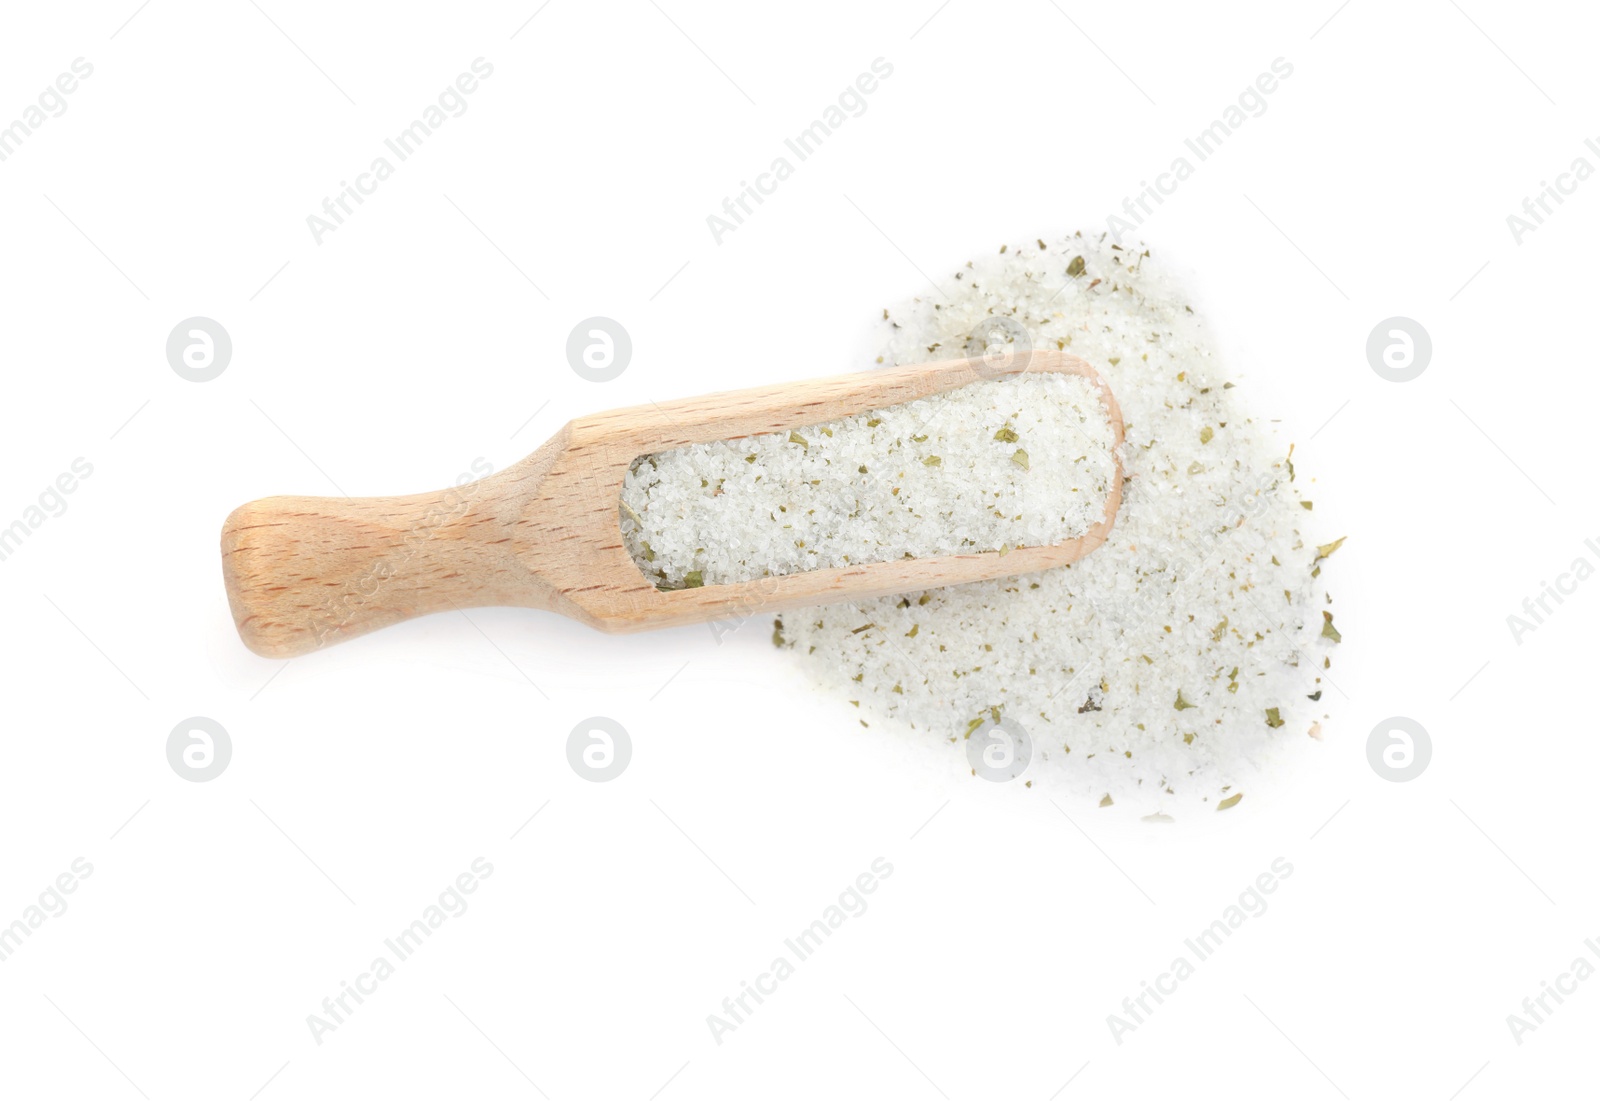 Photo of Wooden scoop with natural herb salt on white background, top view